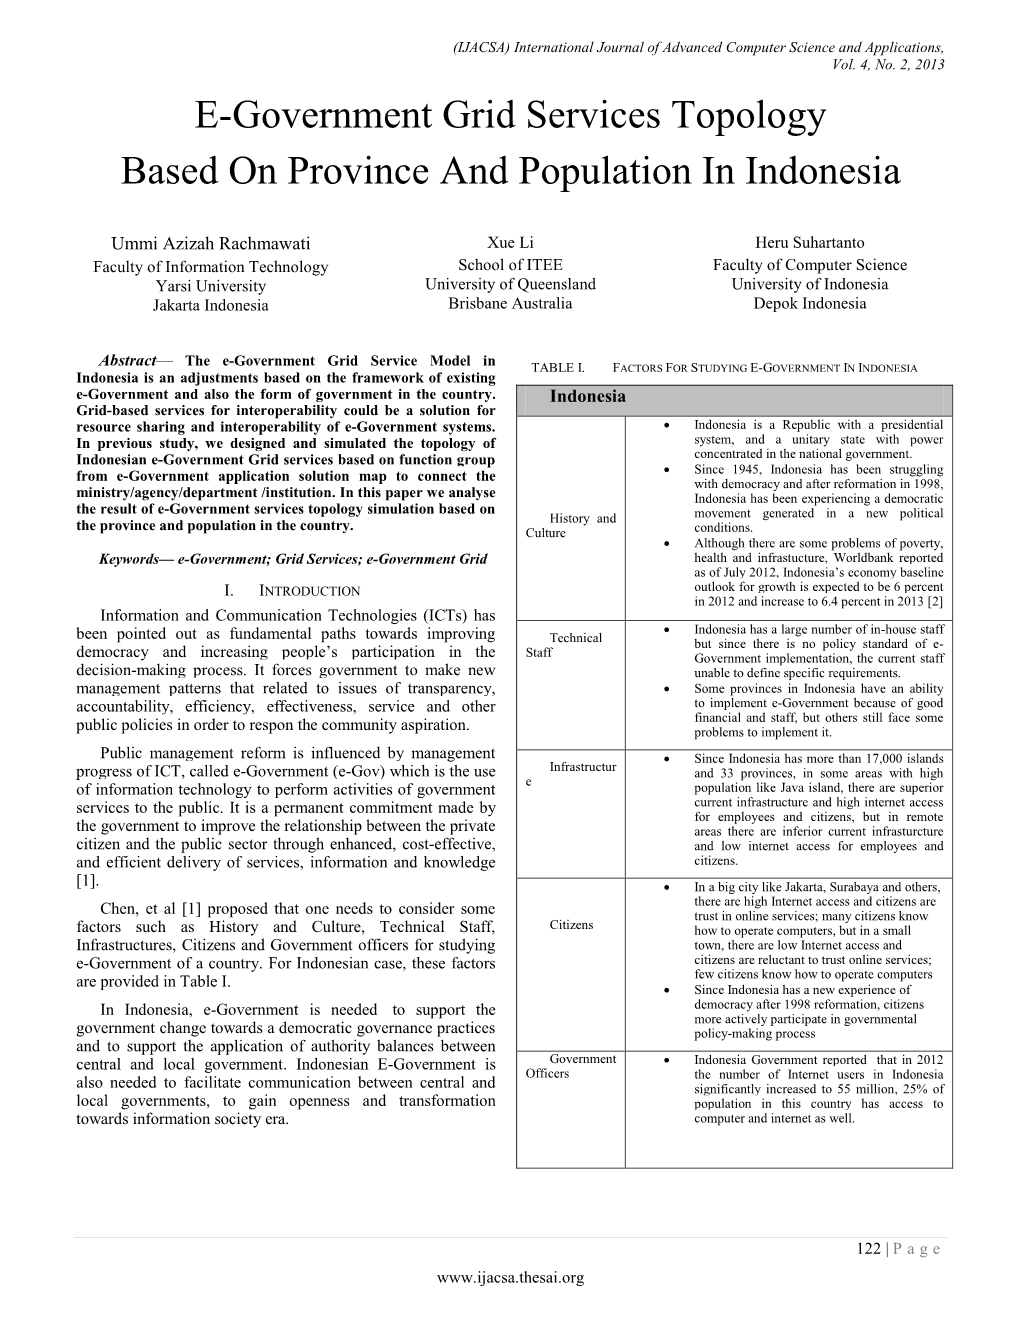 E-Government Grid Services Topology Based on Province and Population in Indonesia